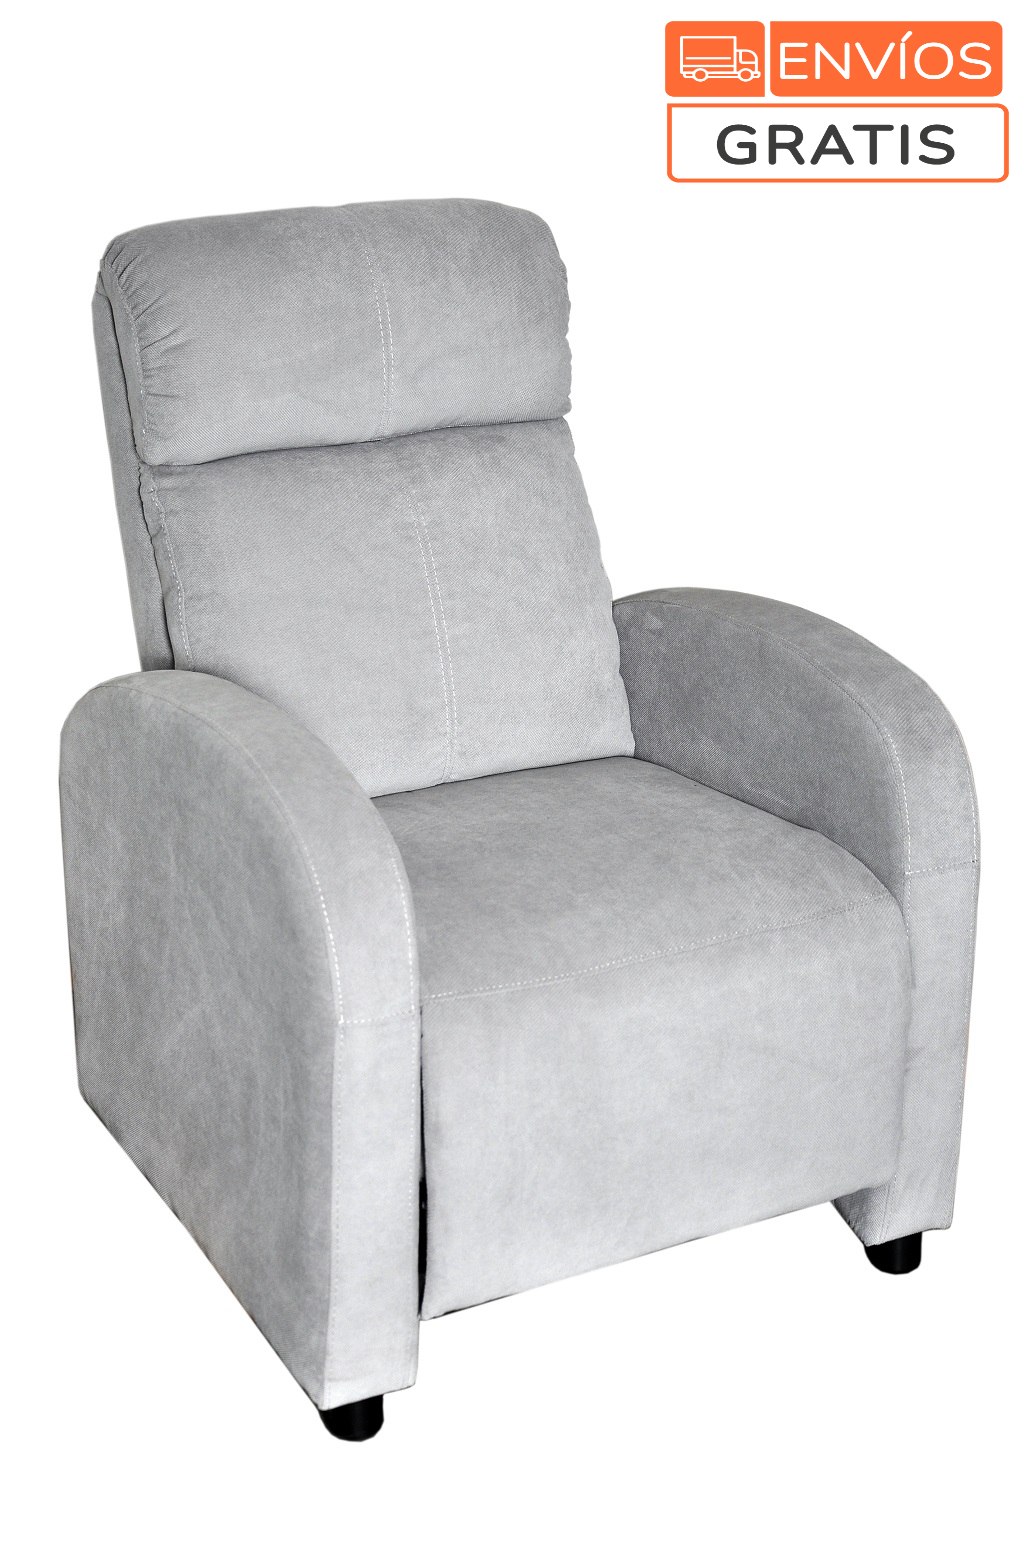 silla-reclinable-sienna,-gris-oscuro